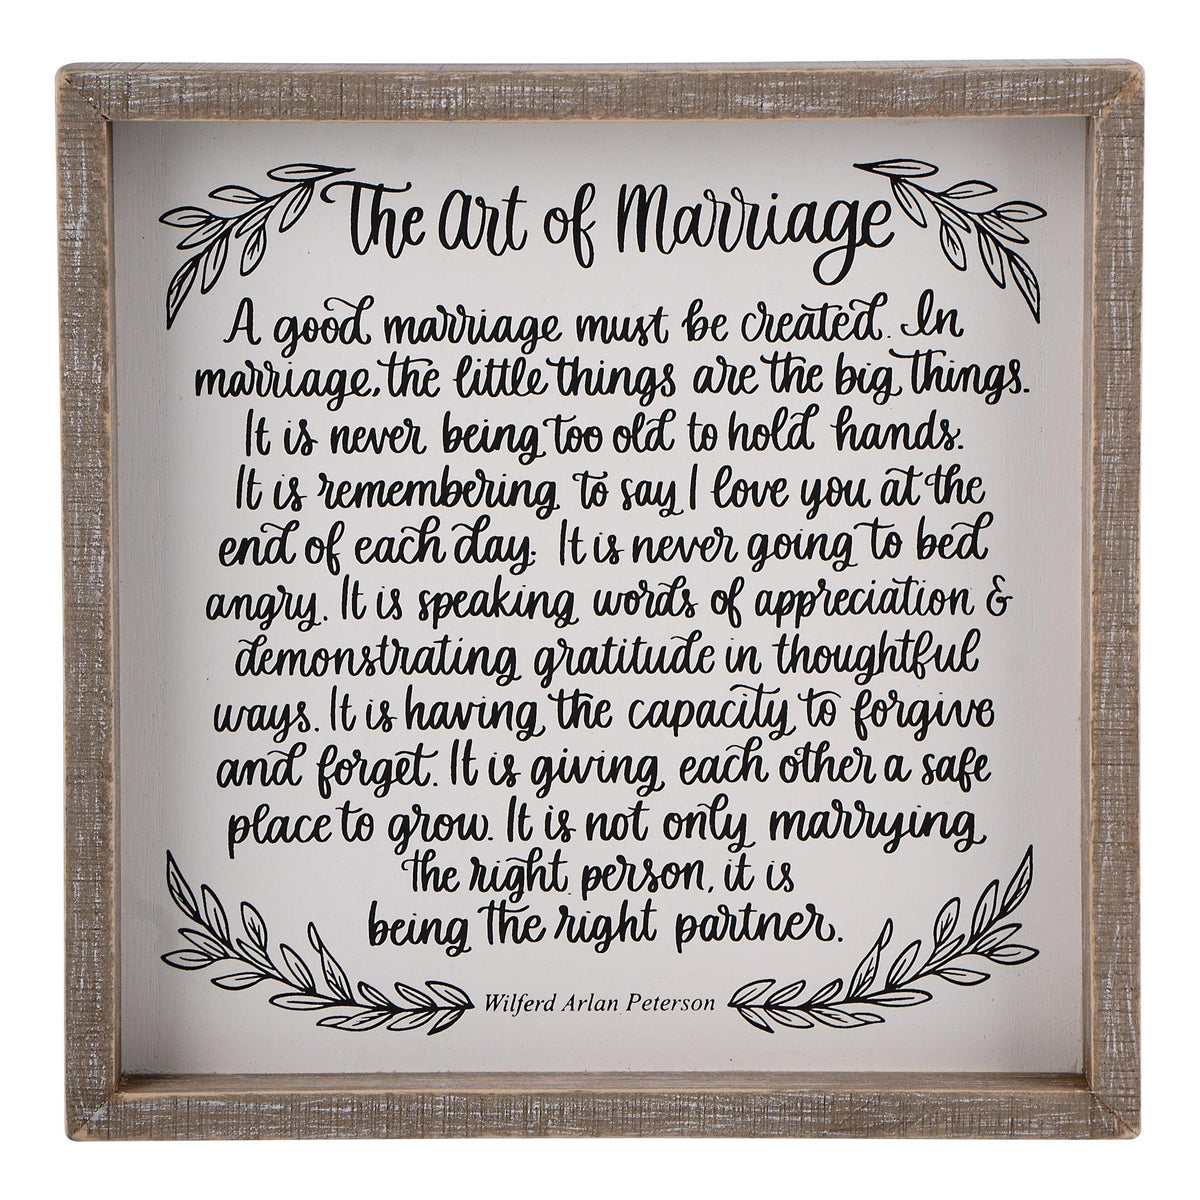 Art of Marriage Framed Board Small - GLORY HAUS 